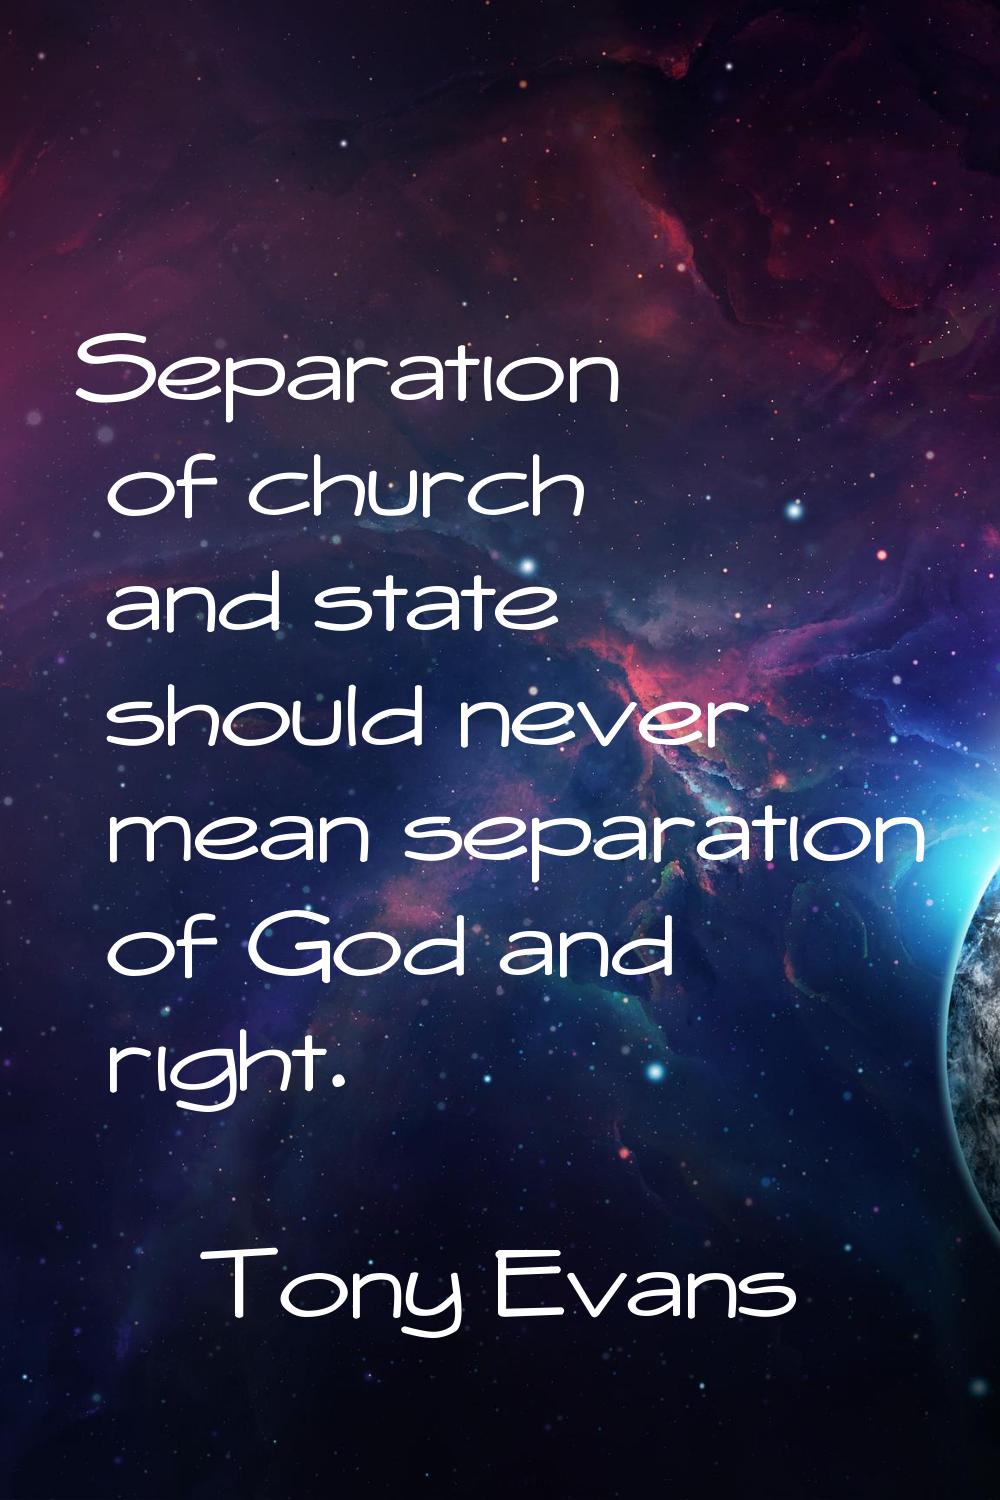 Separation of church and state should never mean separation of God and right.